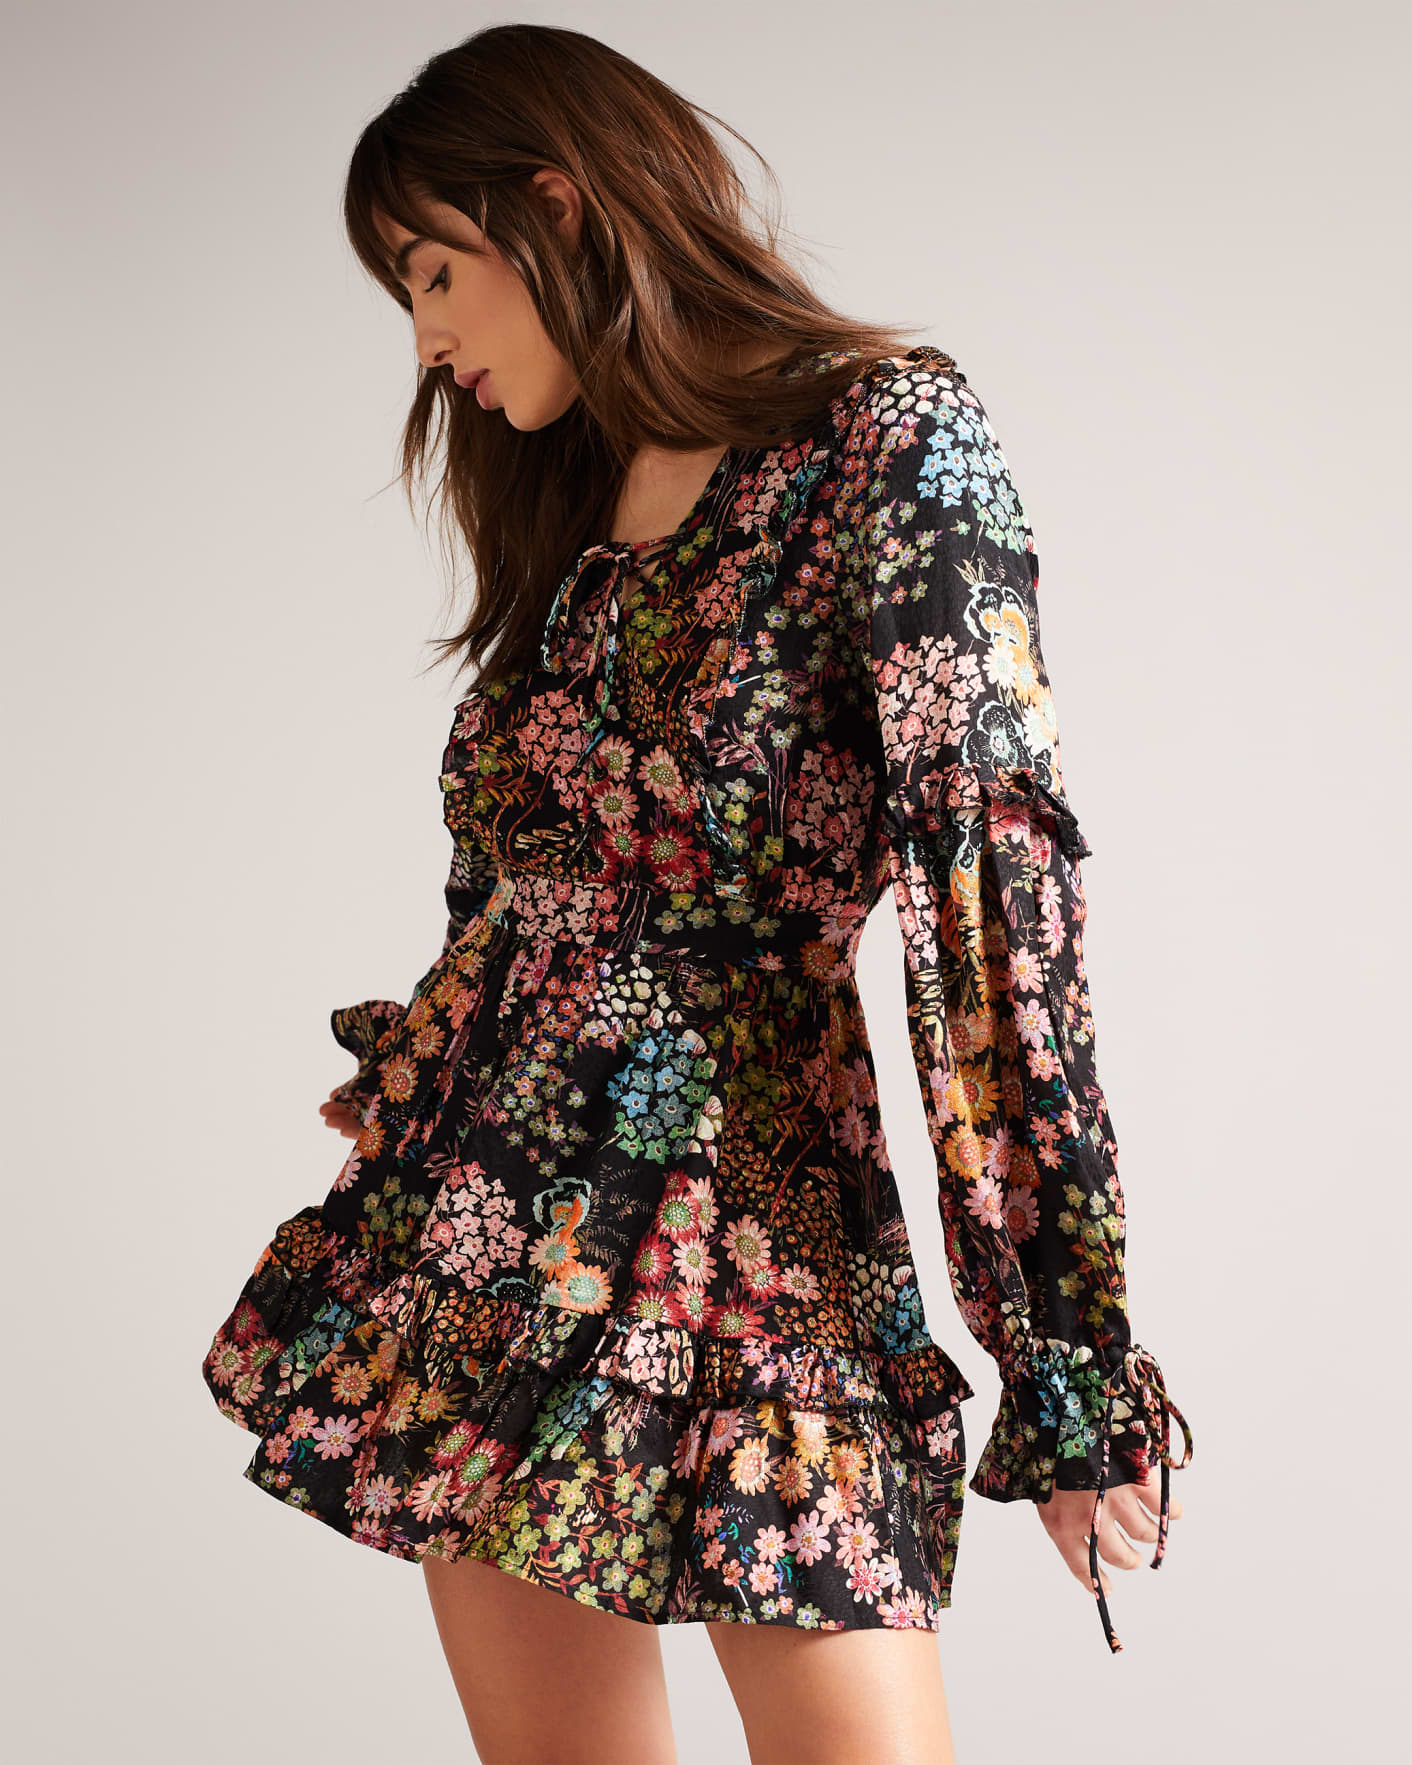 Black Mini Dress With Ruffle Details Ted Baker